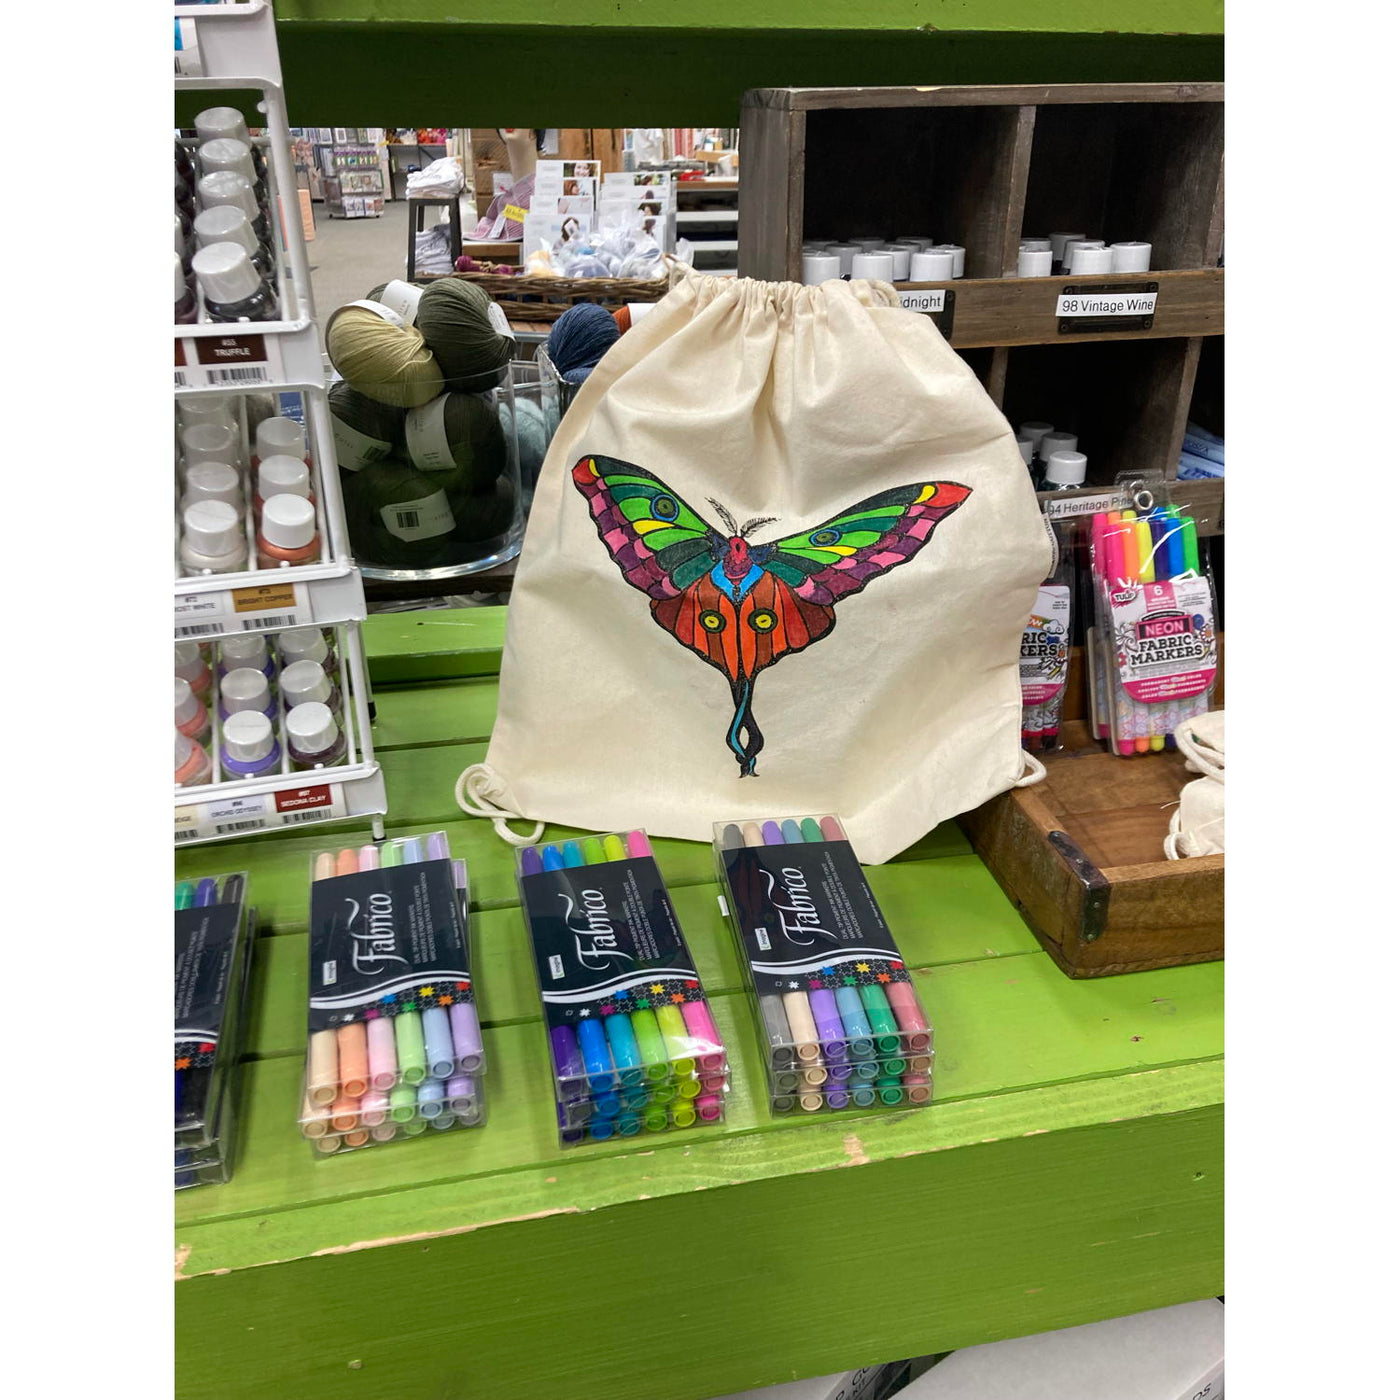 Limited Edition! Canvas Luna Moth Printed Drawstring Backpack - by Valori Wells